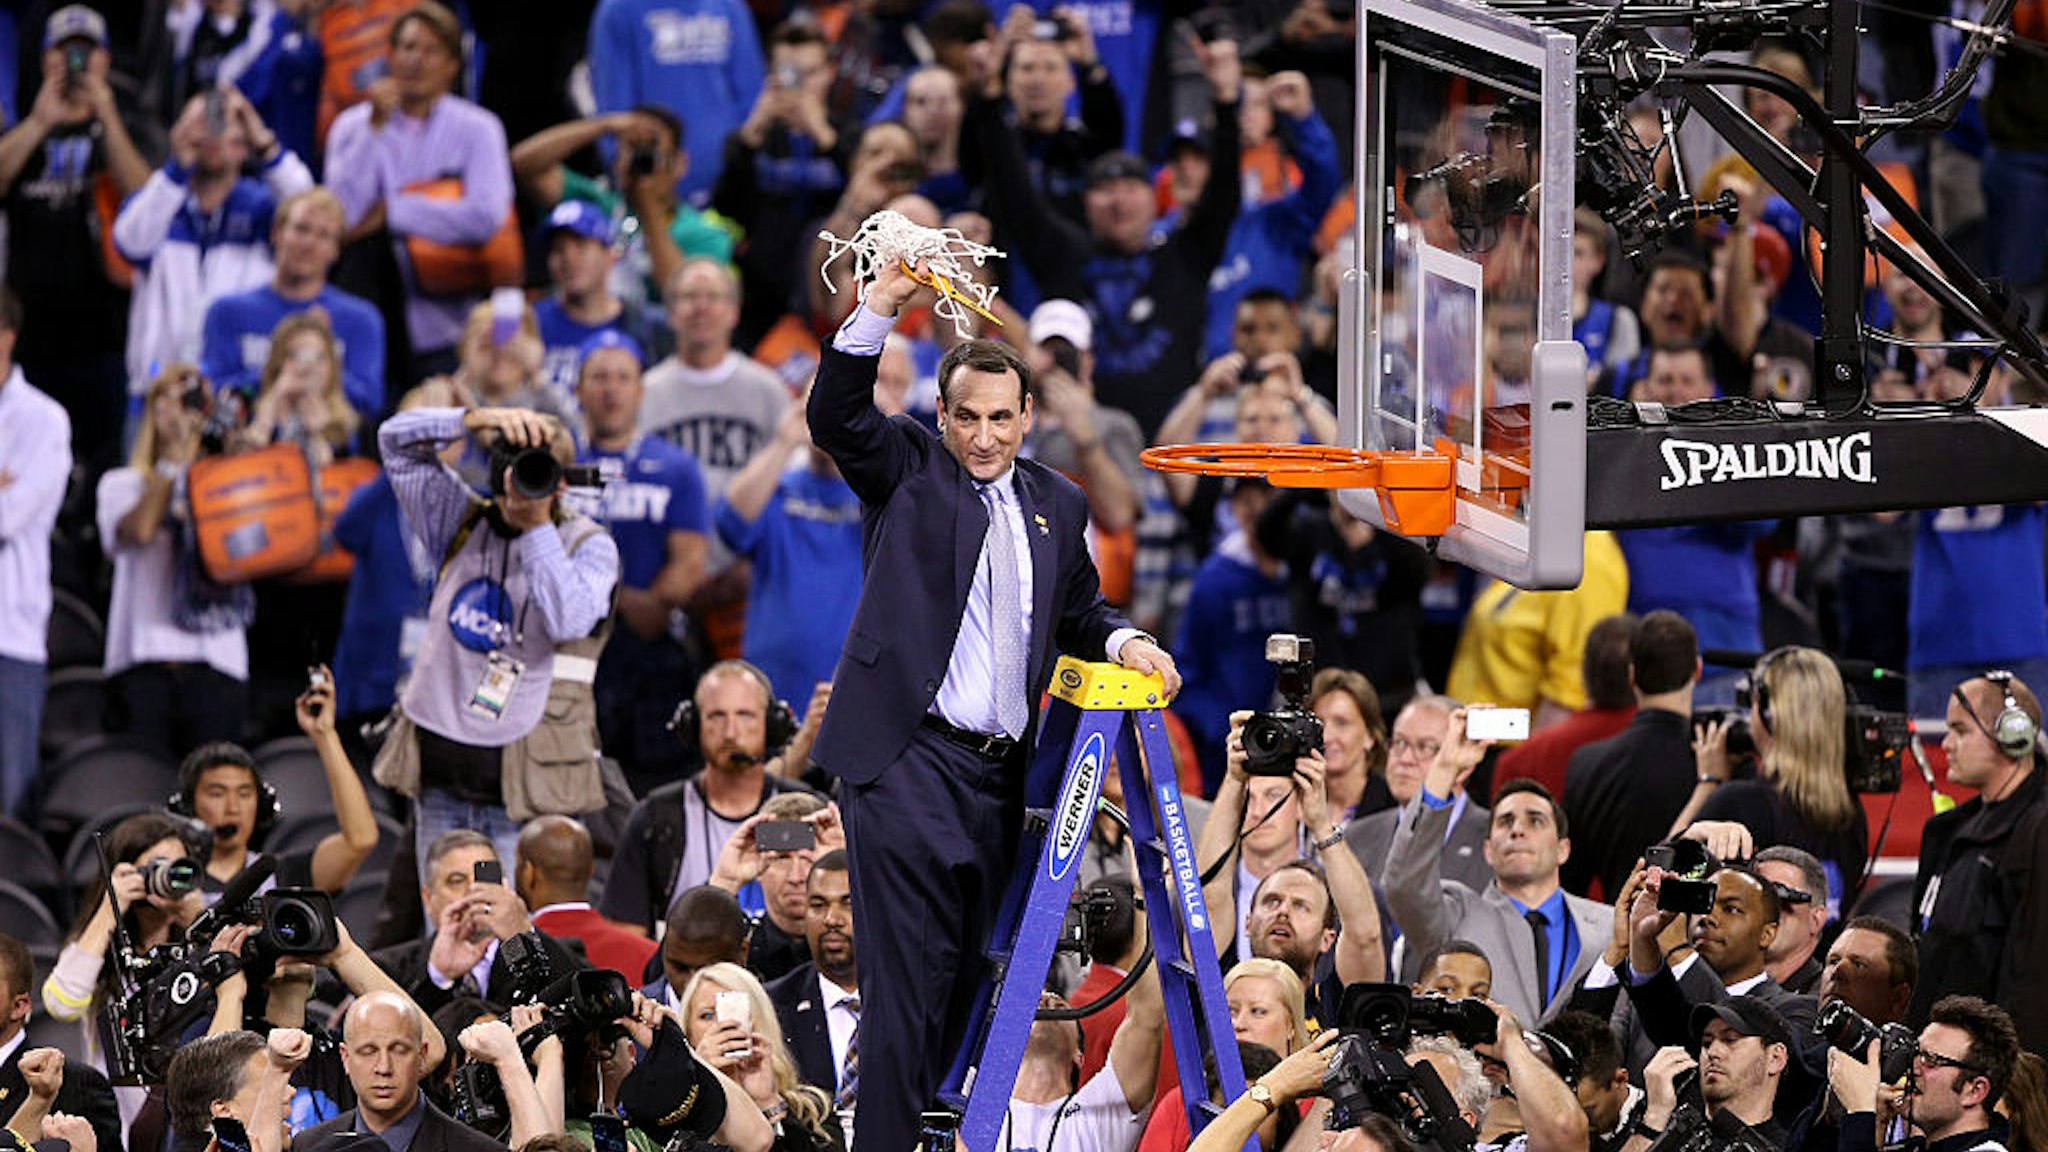 INDIANAPOLIS, IN - APRIL 06: Head coach Mike Krzyzewski of the Duke Blue Devils cuts down the net after defeating the Wisconsin Badgers during the NCAA Men's Final Four National Championship at Lucas Oil Stadium on April 6, 2015 in Indianapolis, Indiana. Duke defeated Wisconsin 68-63. (Photo by Joe Robbins/Getty Images)